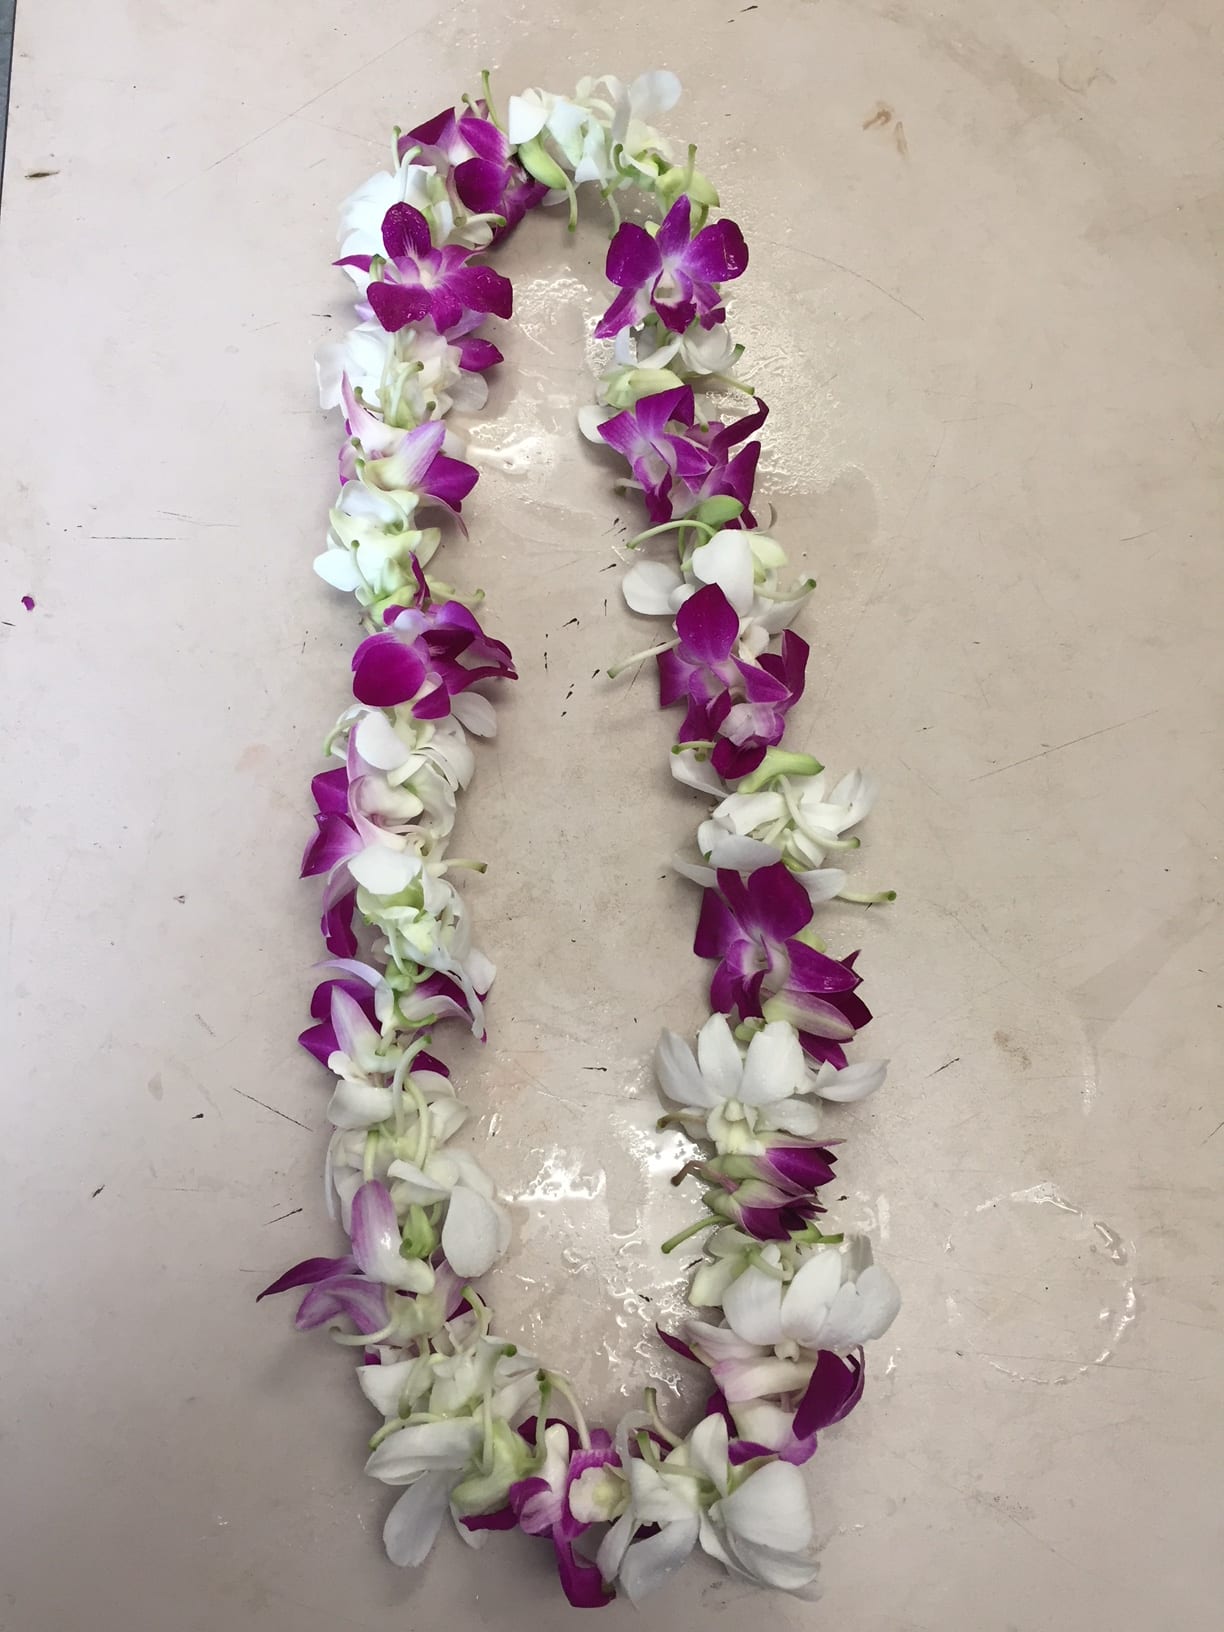 The Art of Lei Making - Materials, Styles, Etiquette traditional lei